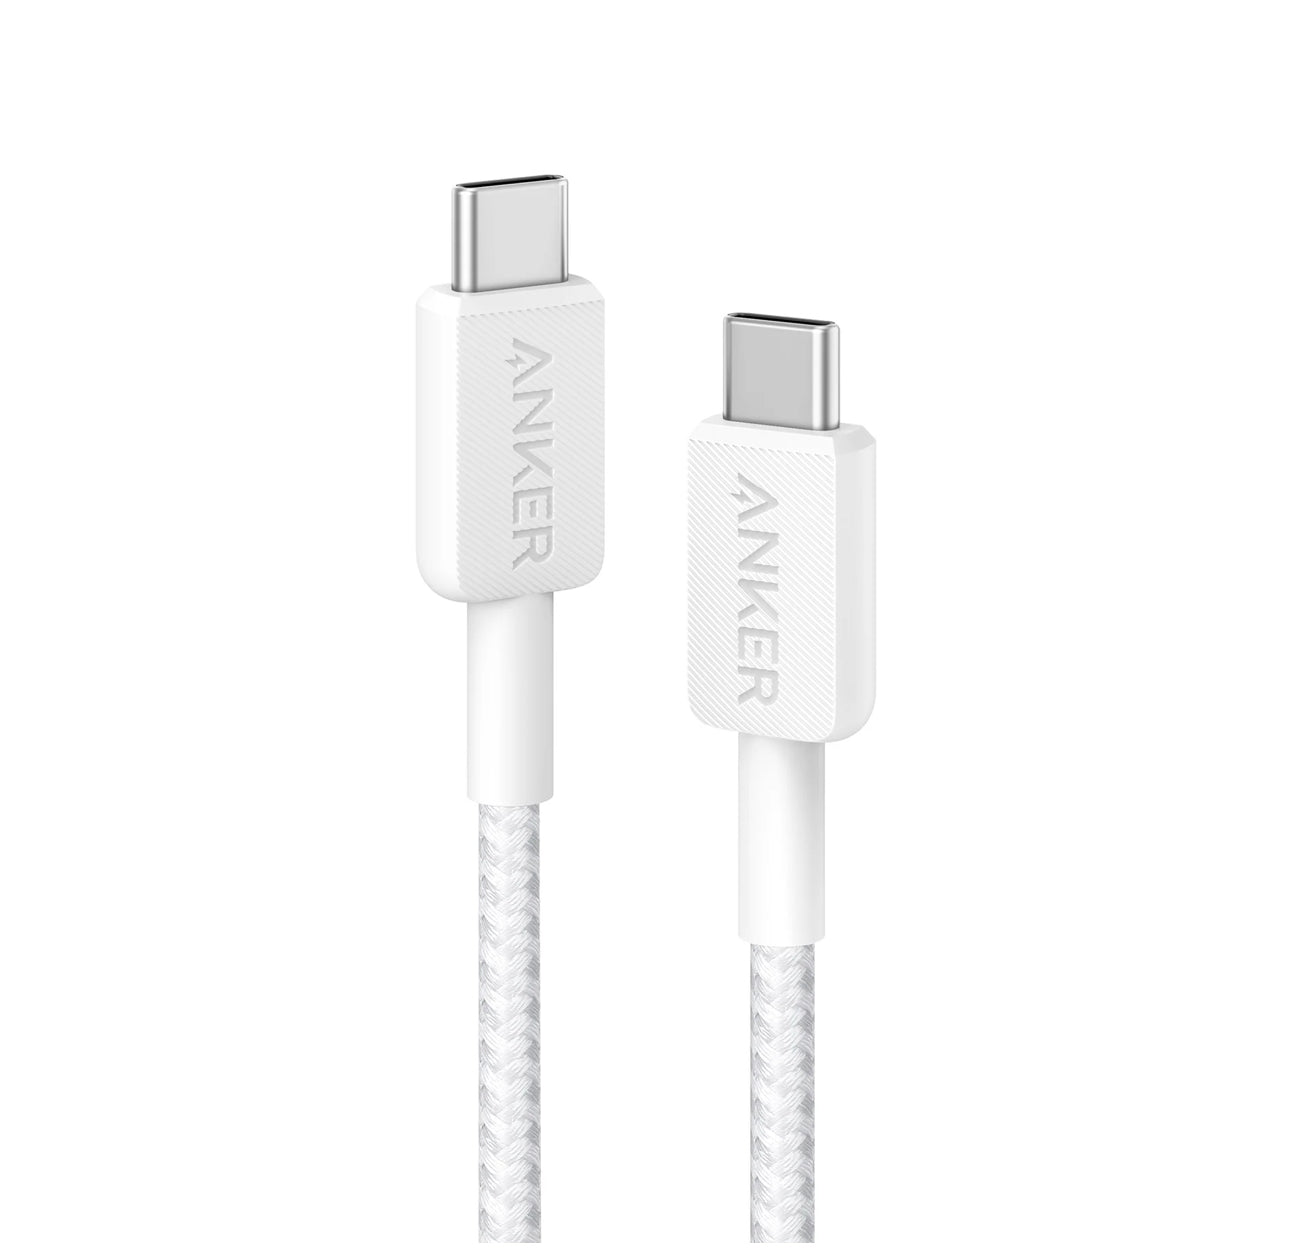 Anker 322 USB-C to USB-C Cable